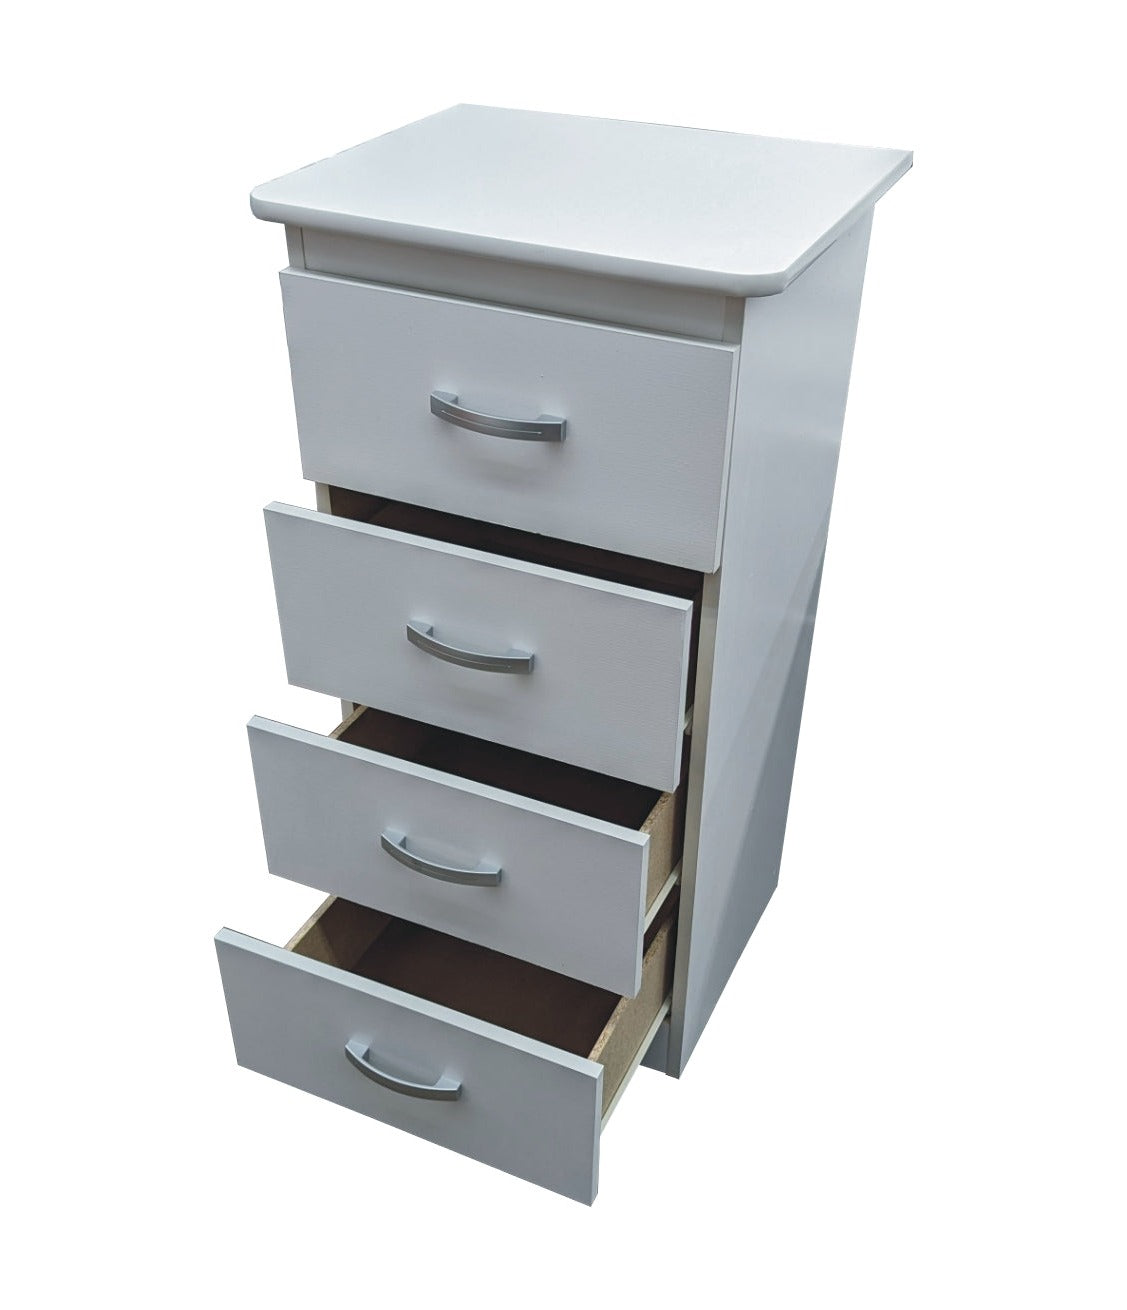 STR "Tall Boy" 4 Drawer Narrow Chest - Available in various Colours